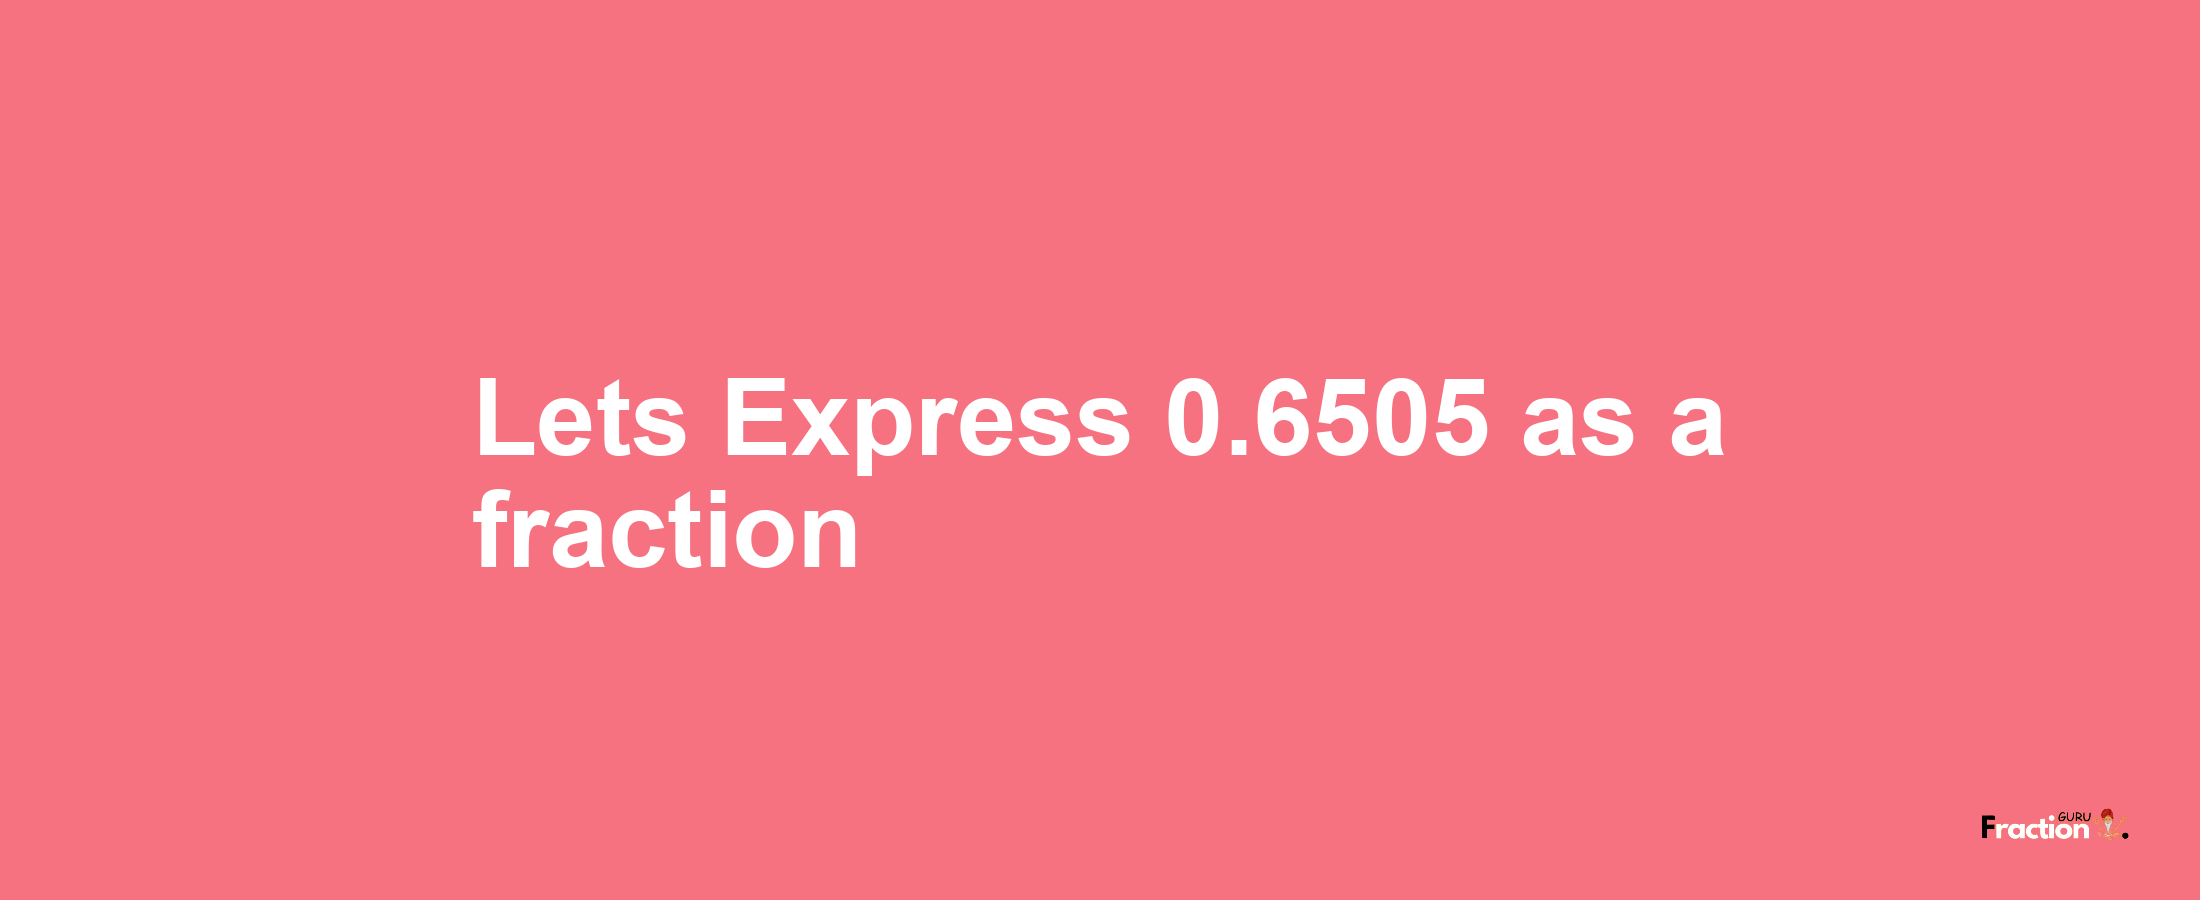 Lets Express 0.6505 as afraction